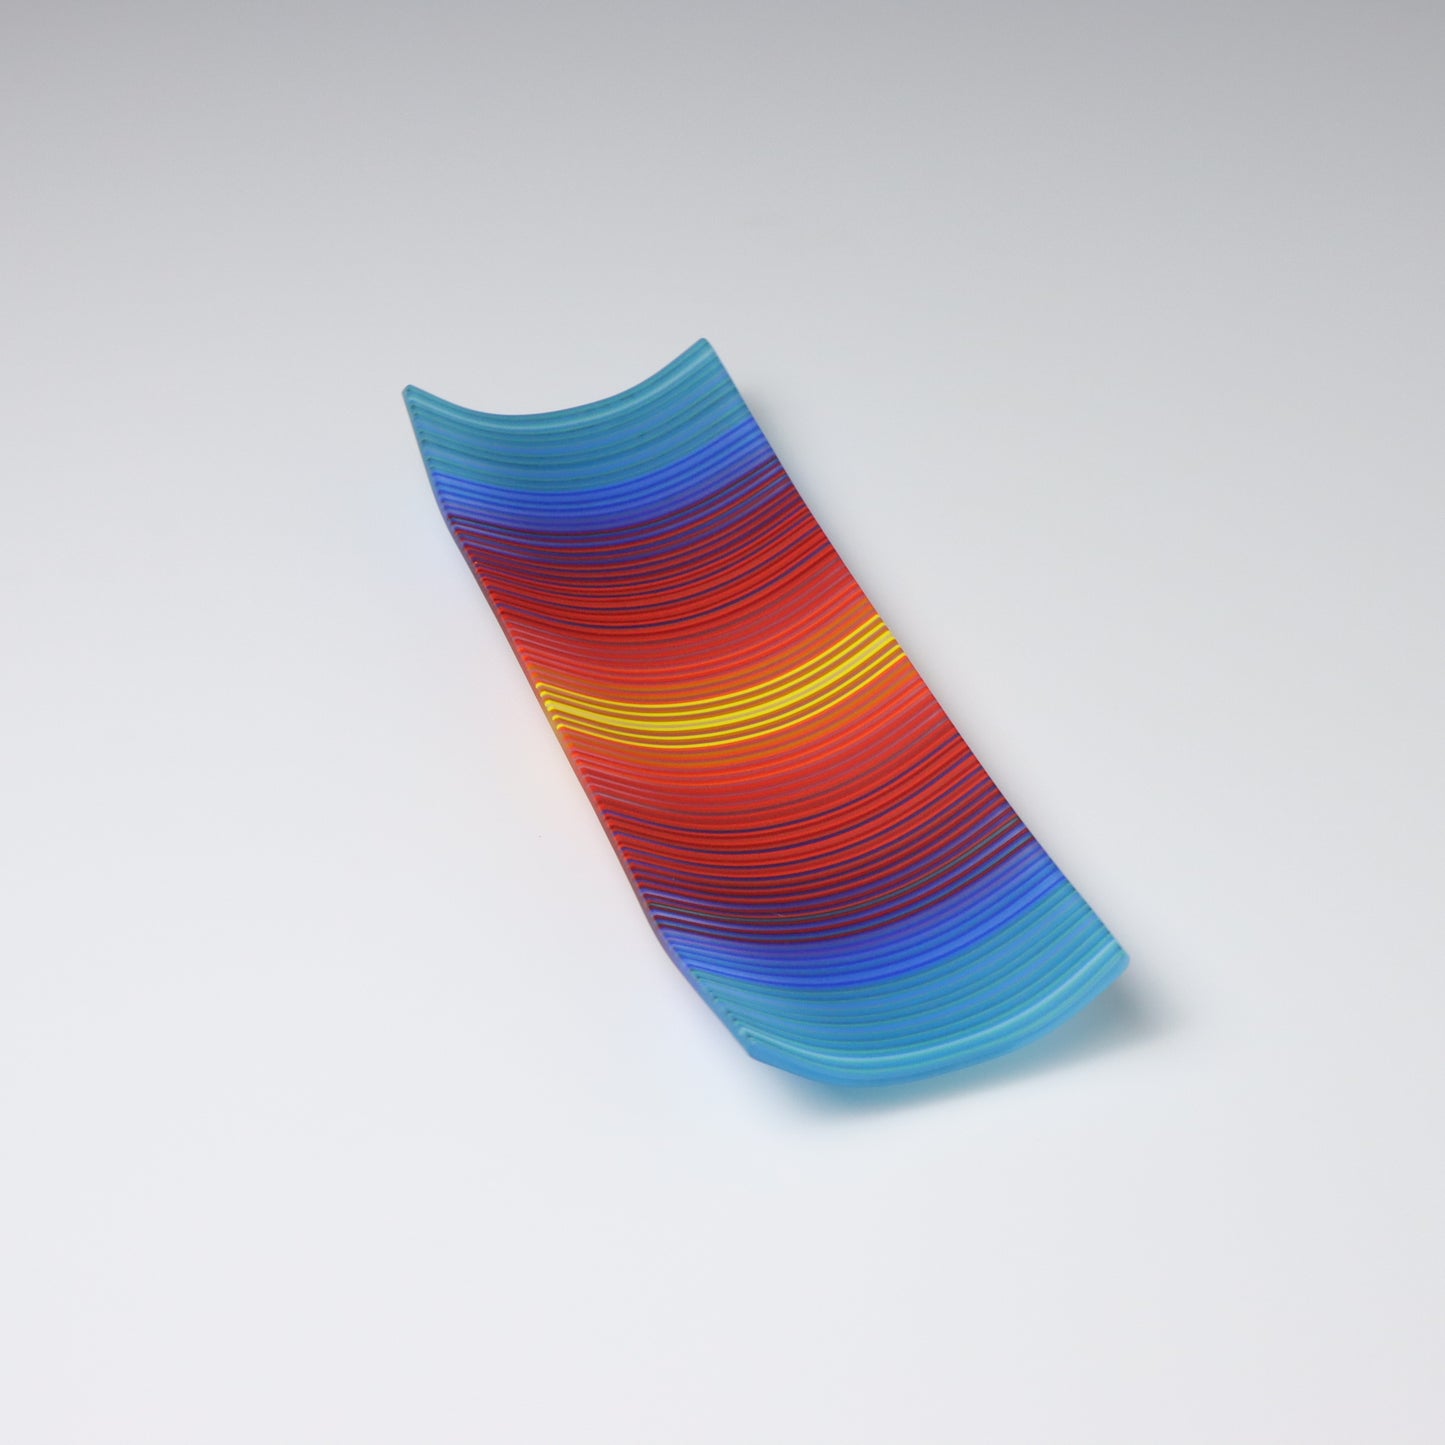 S3361 | Rectangular Shaped ColourWave Glass Plate | Turquoise Blue, Purple, Red and Yellow